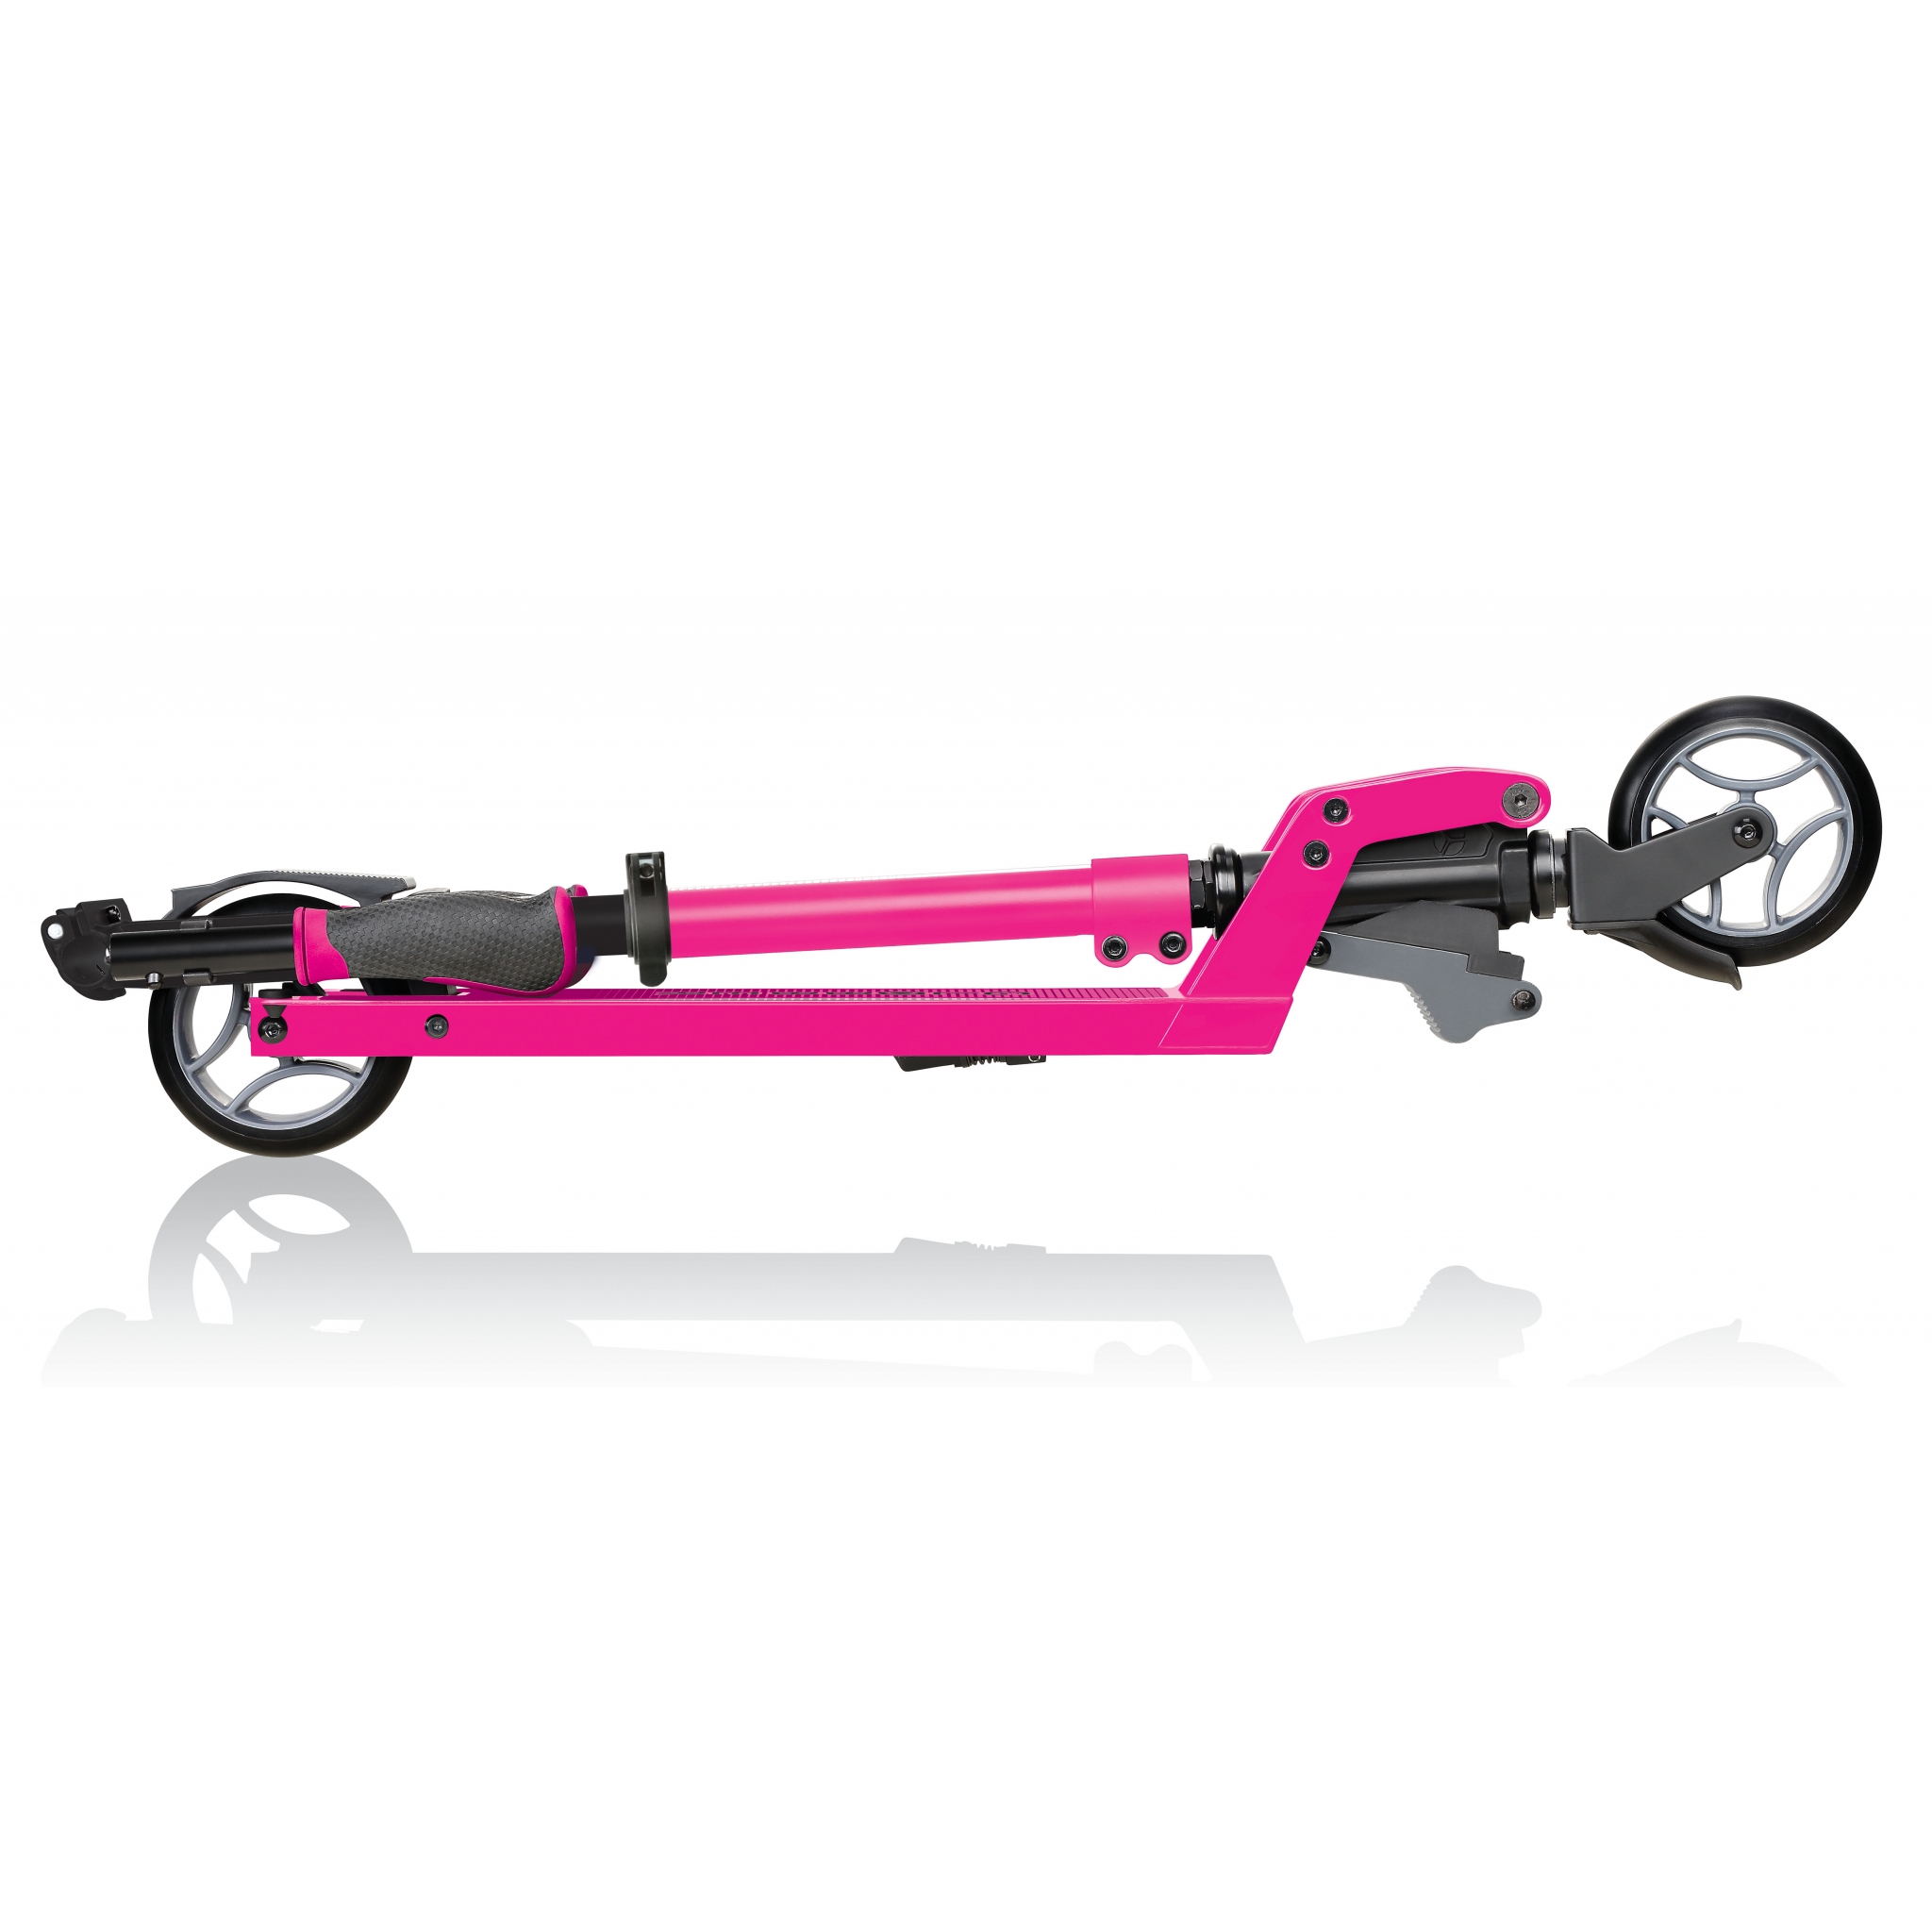 ONE-K-125-2-wheel-teen-scooter-foldable-scooter-and-handlebars_neon-pink 3